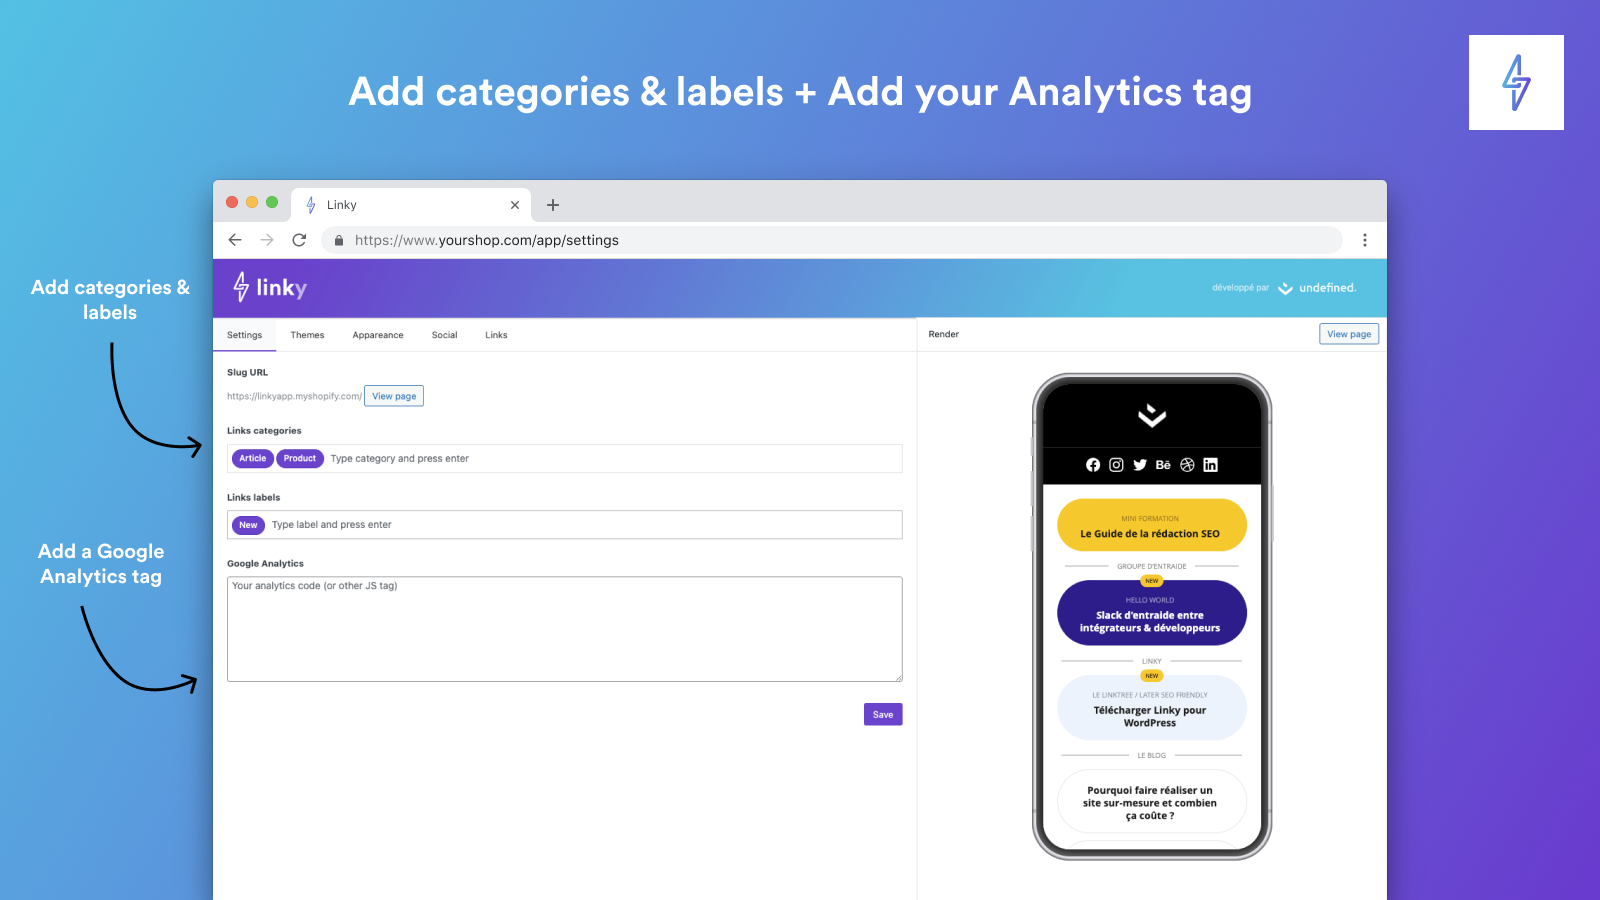 Add categories & labels + Add your Analytics tag